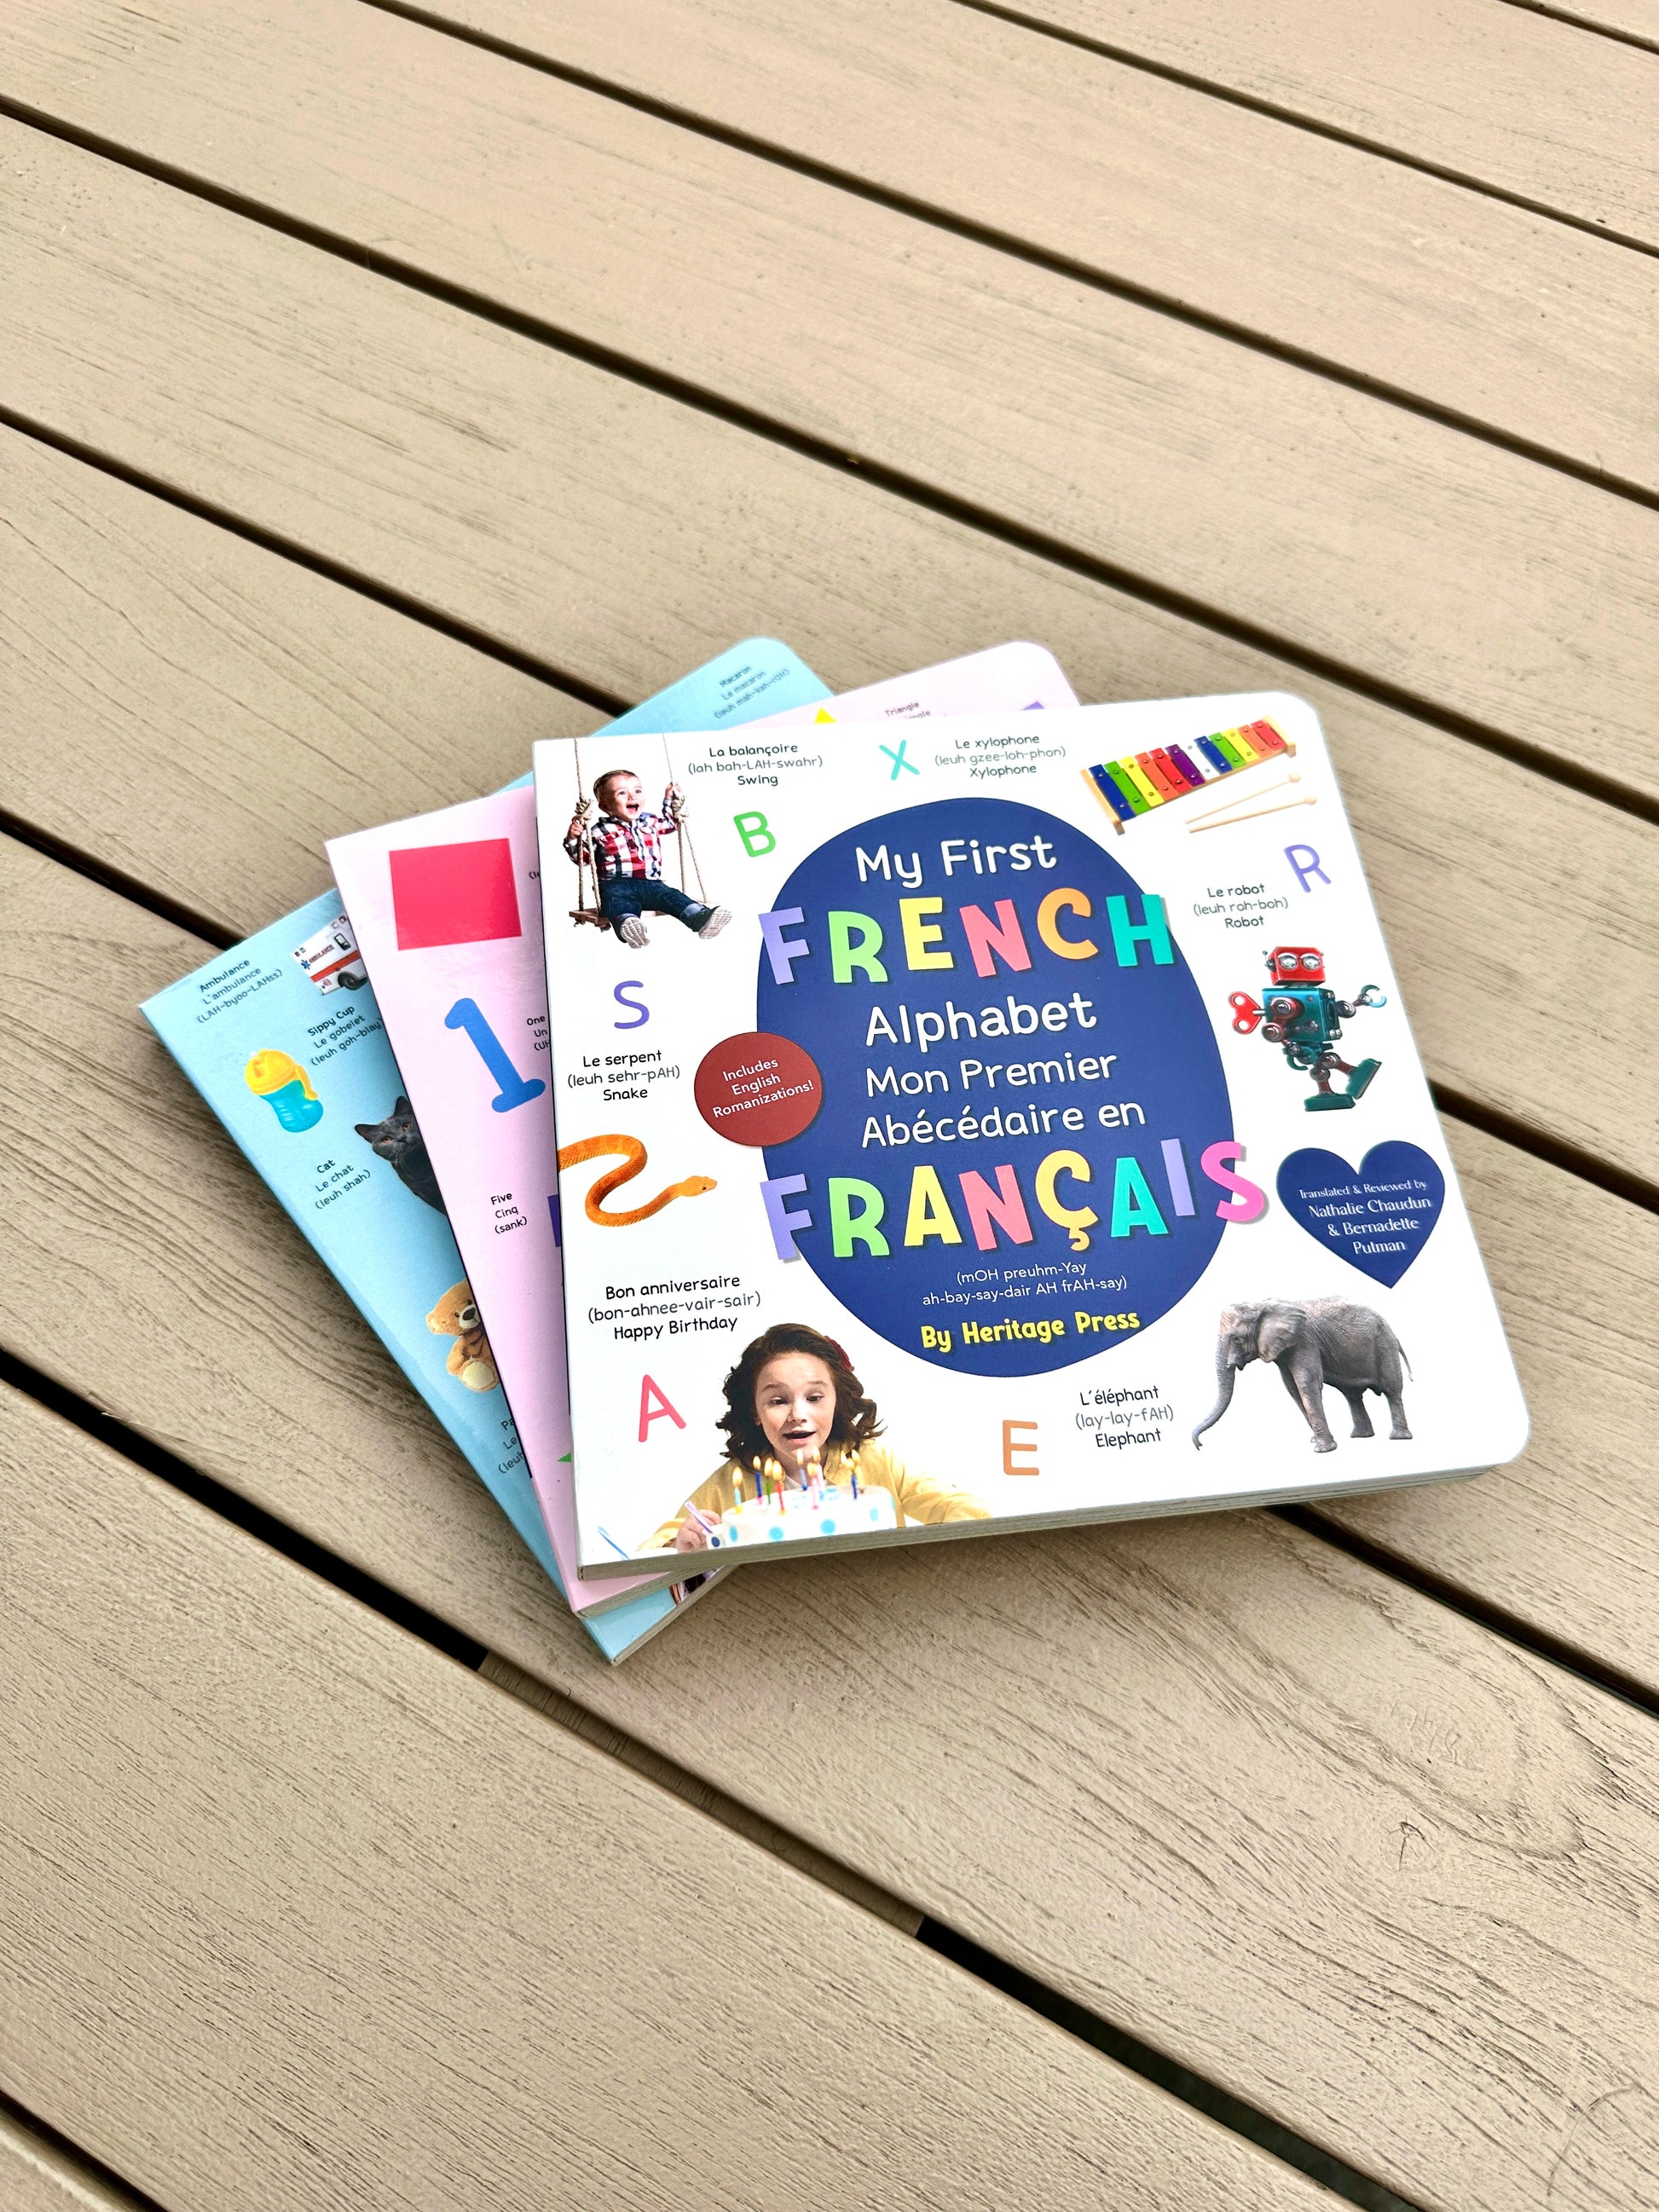 Mes premiers mots - Basic French Vocabulary Word Wall Bundle